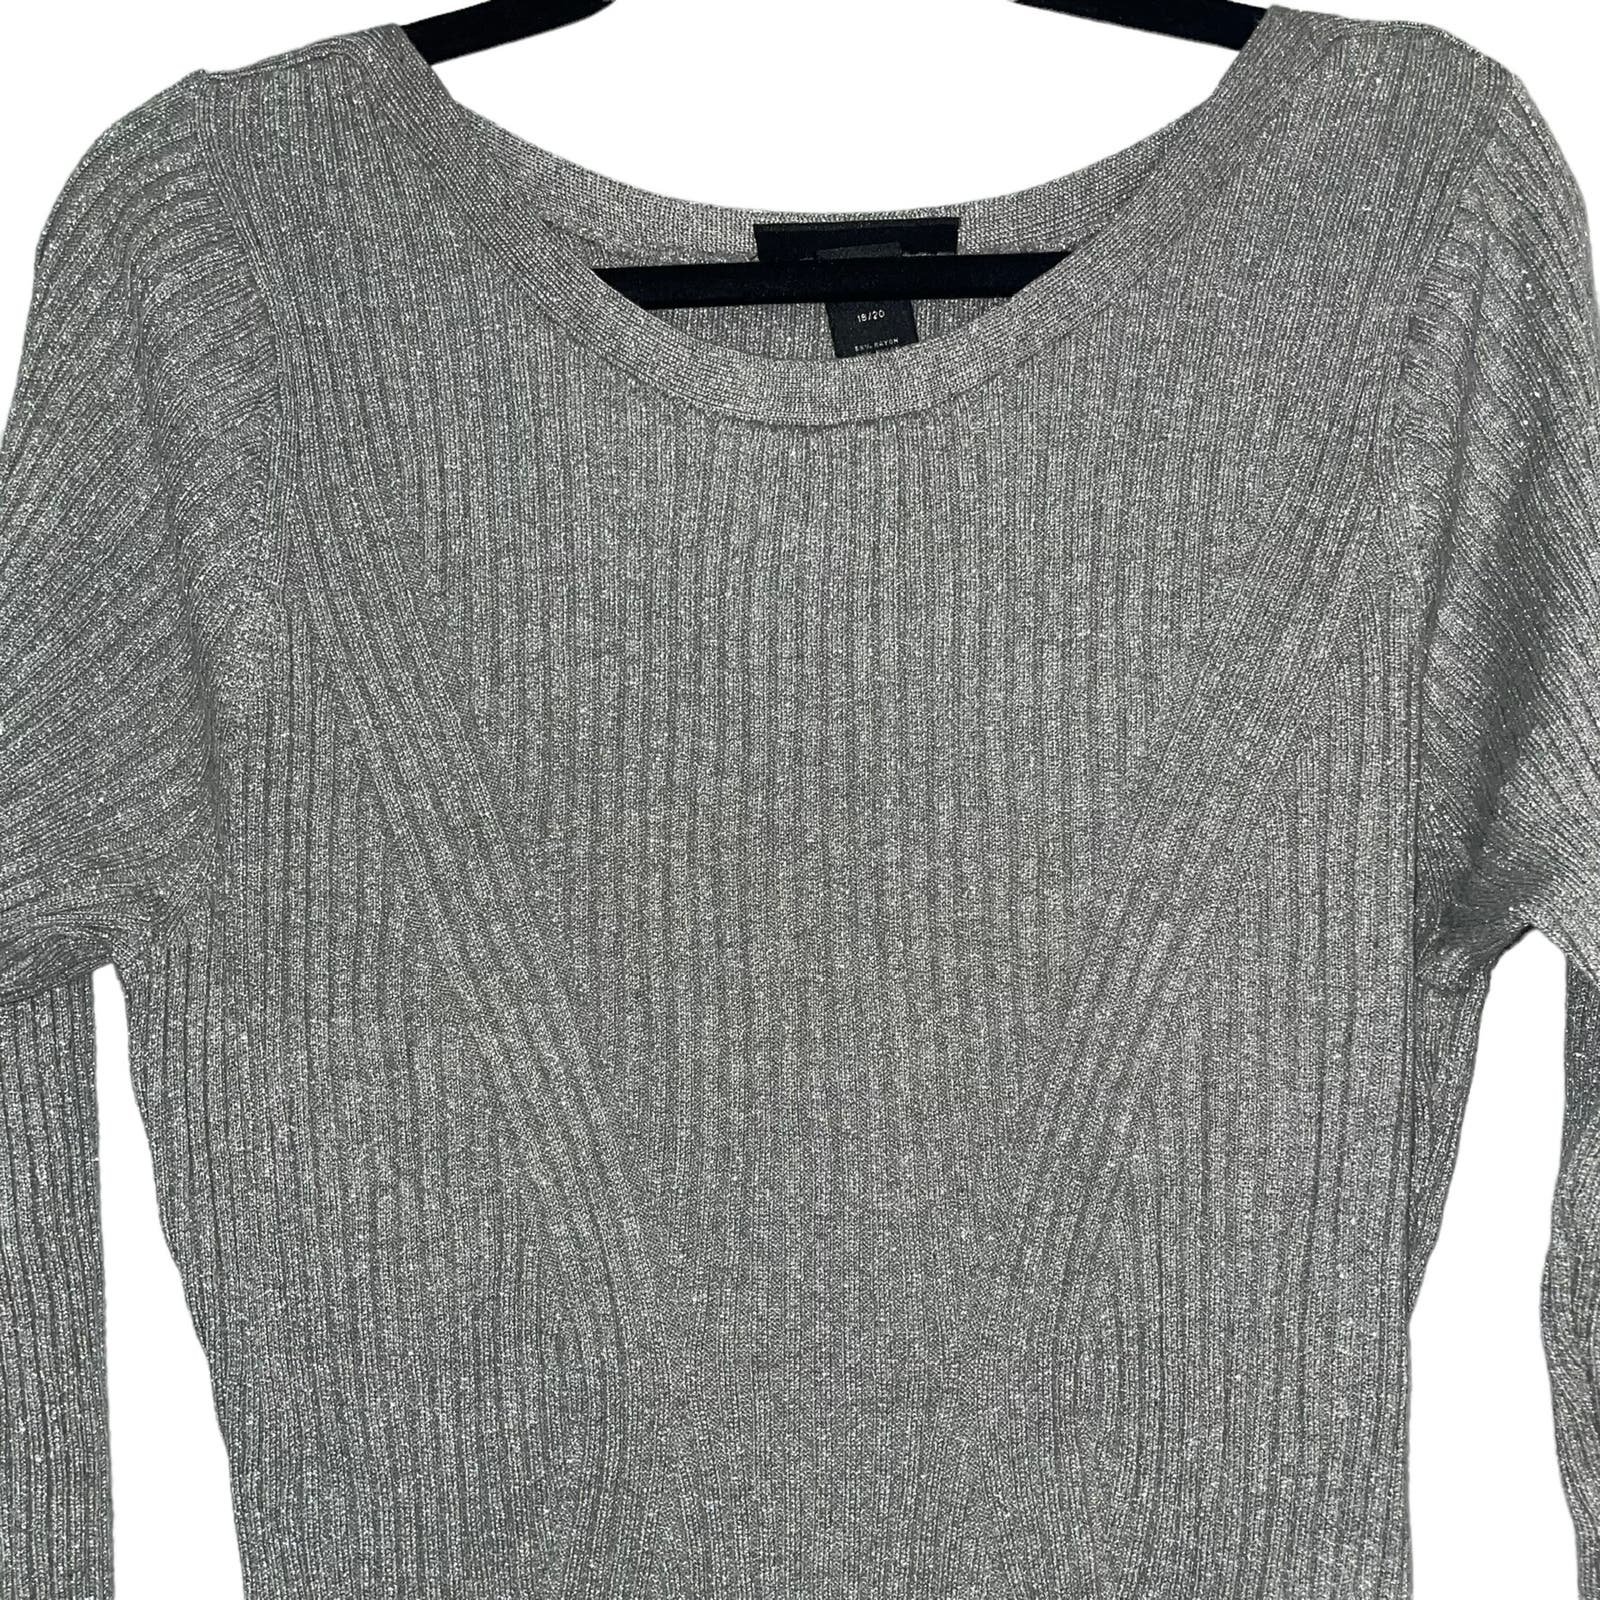 where to buy  Lane Bryant Lightweight Sweater Gray Silver Ribbed Sz 18/20 oKNvvJzSq just buy it